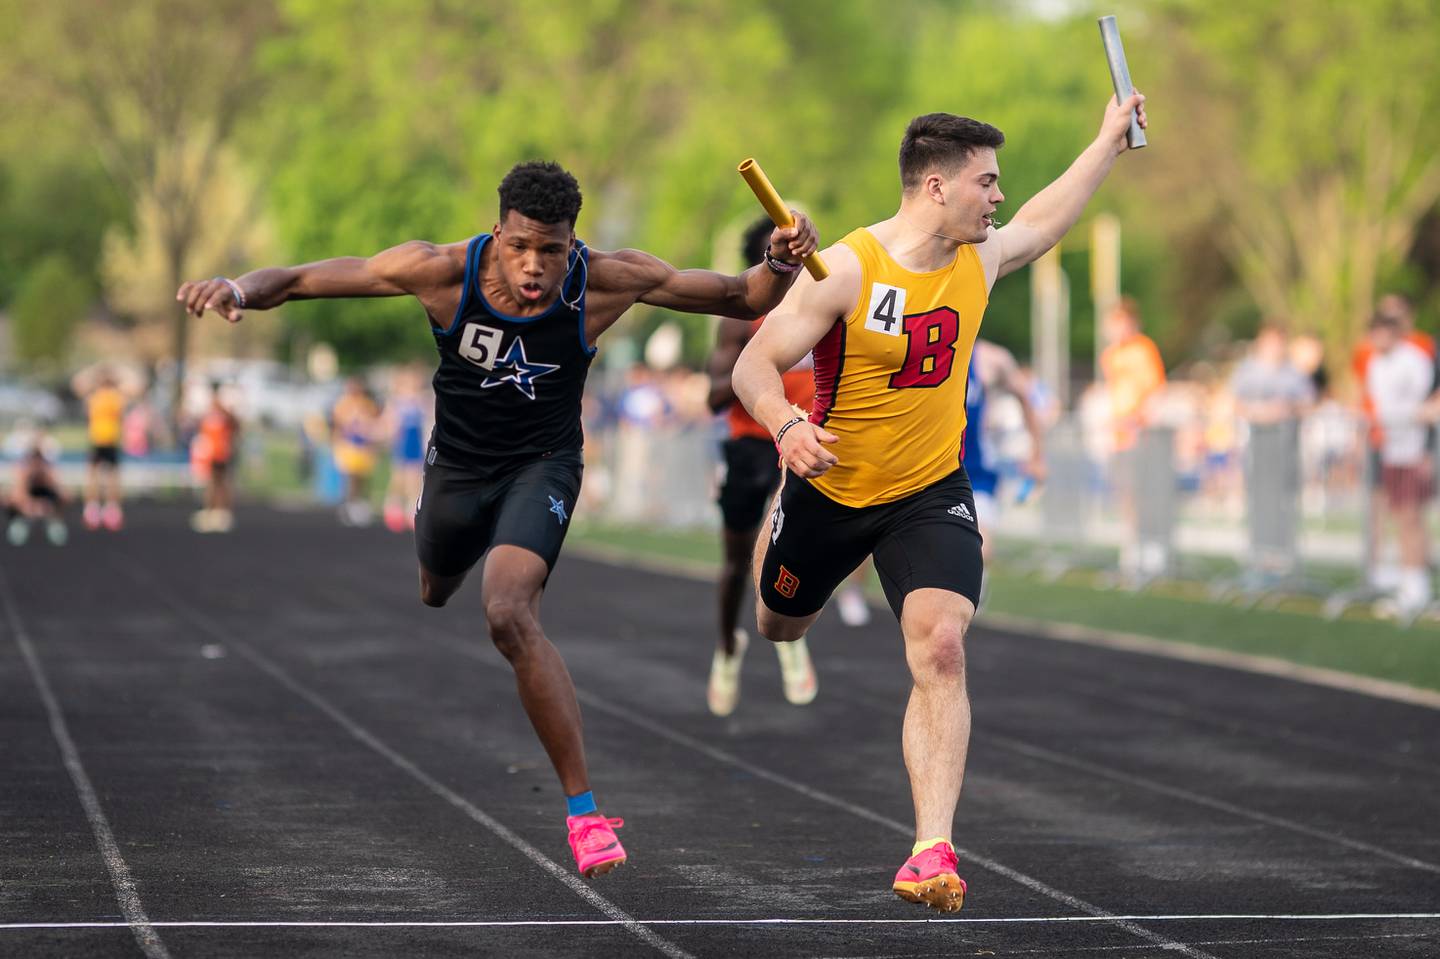 St. Charles North’s Ayodele Bateye (left) beats Batavia’s Ryan Whitwell in the anchor leg of the 4x100 meter relay race during a DuKane Conference boys track and field meet at Geneva High School on Thursday, May 11, 2023.